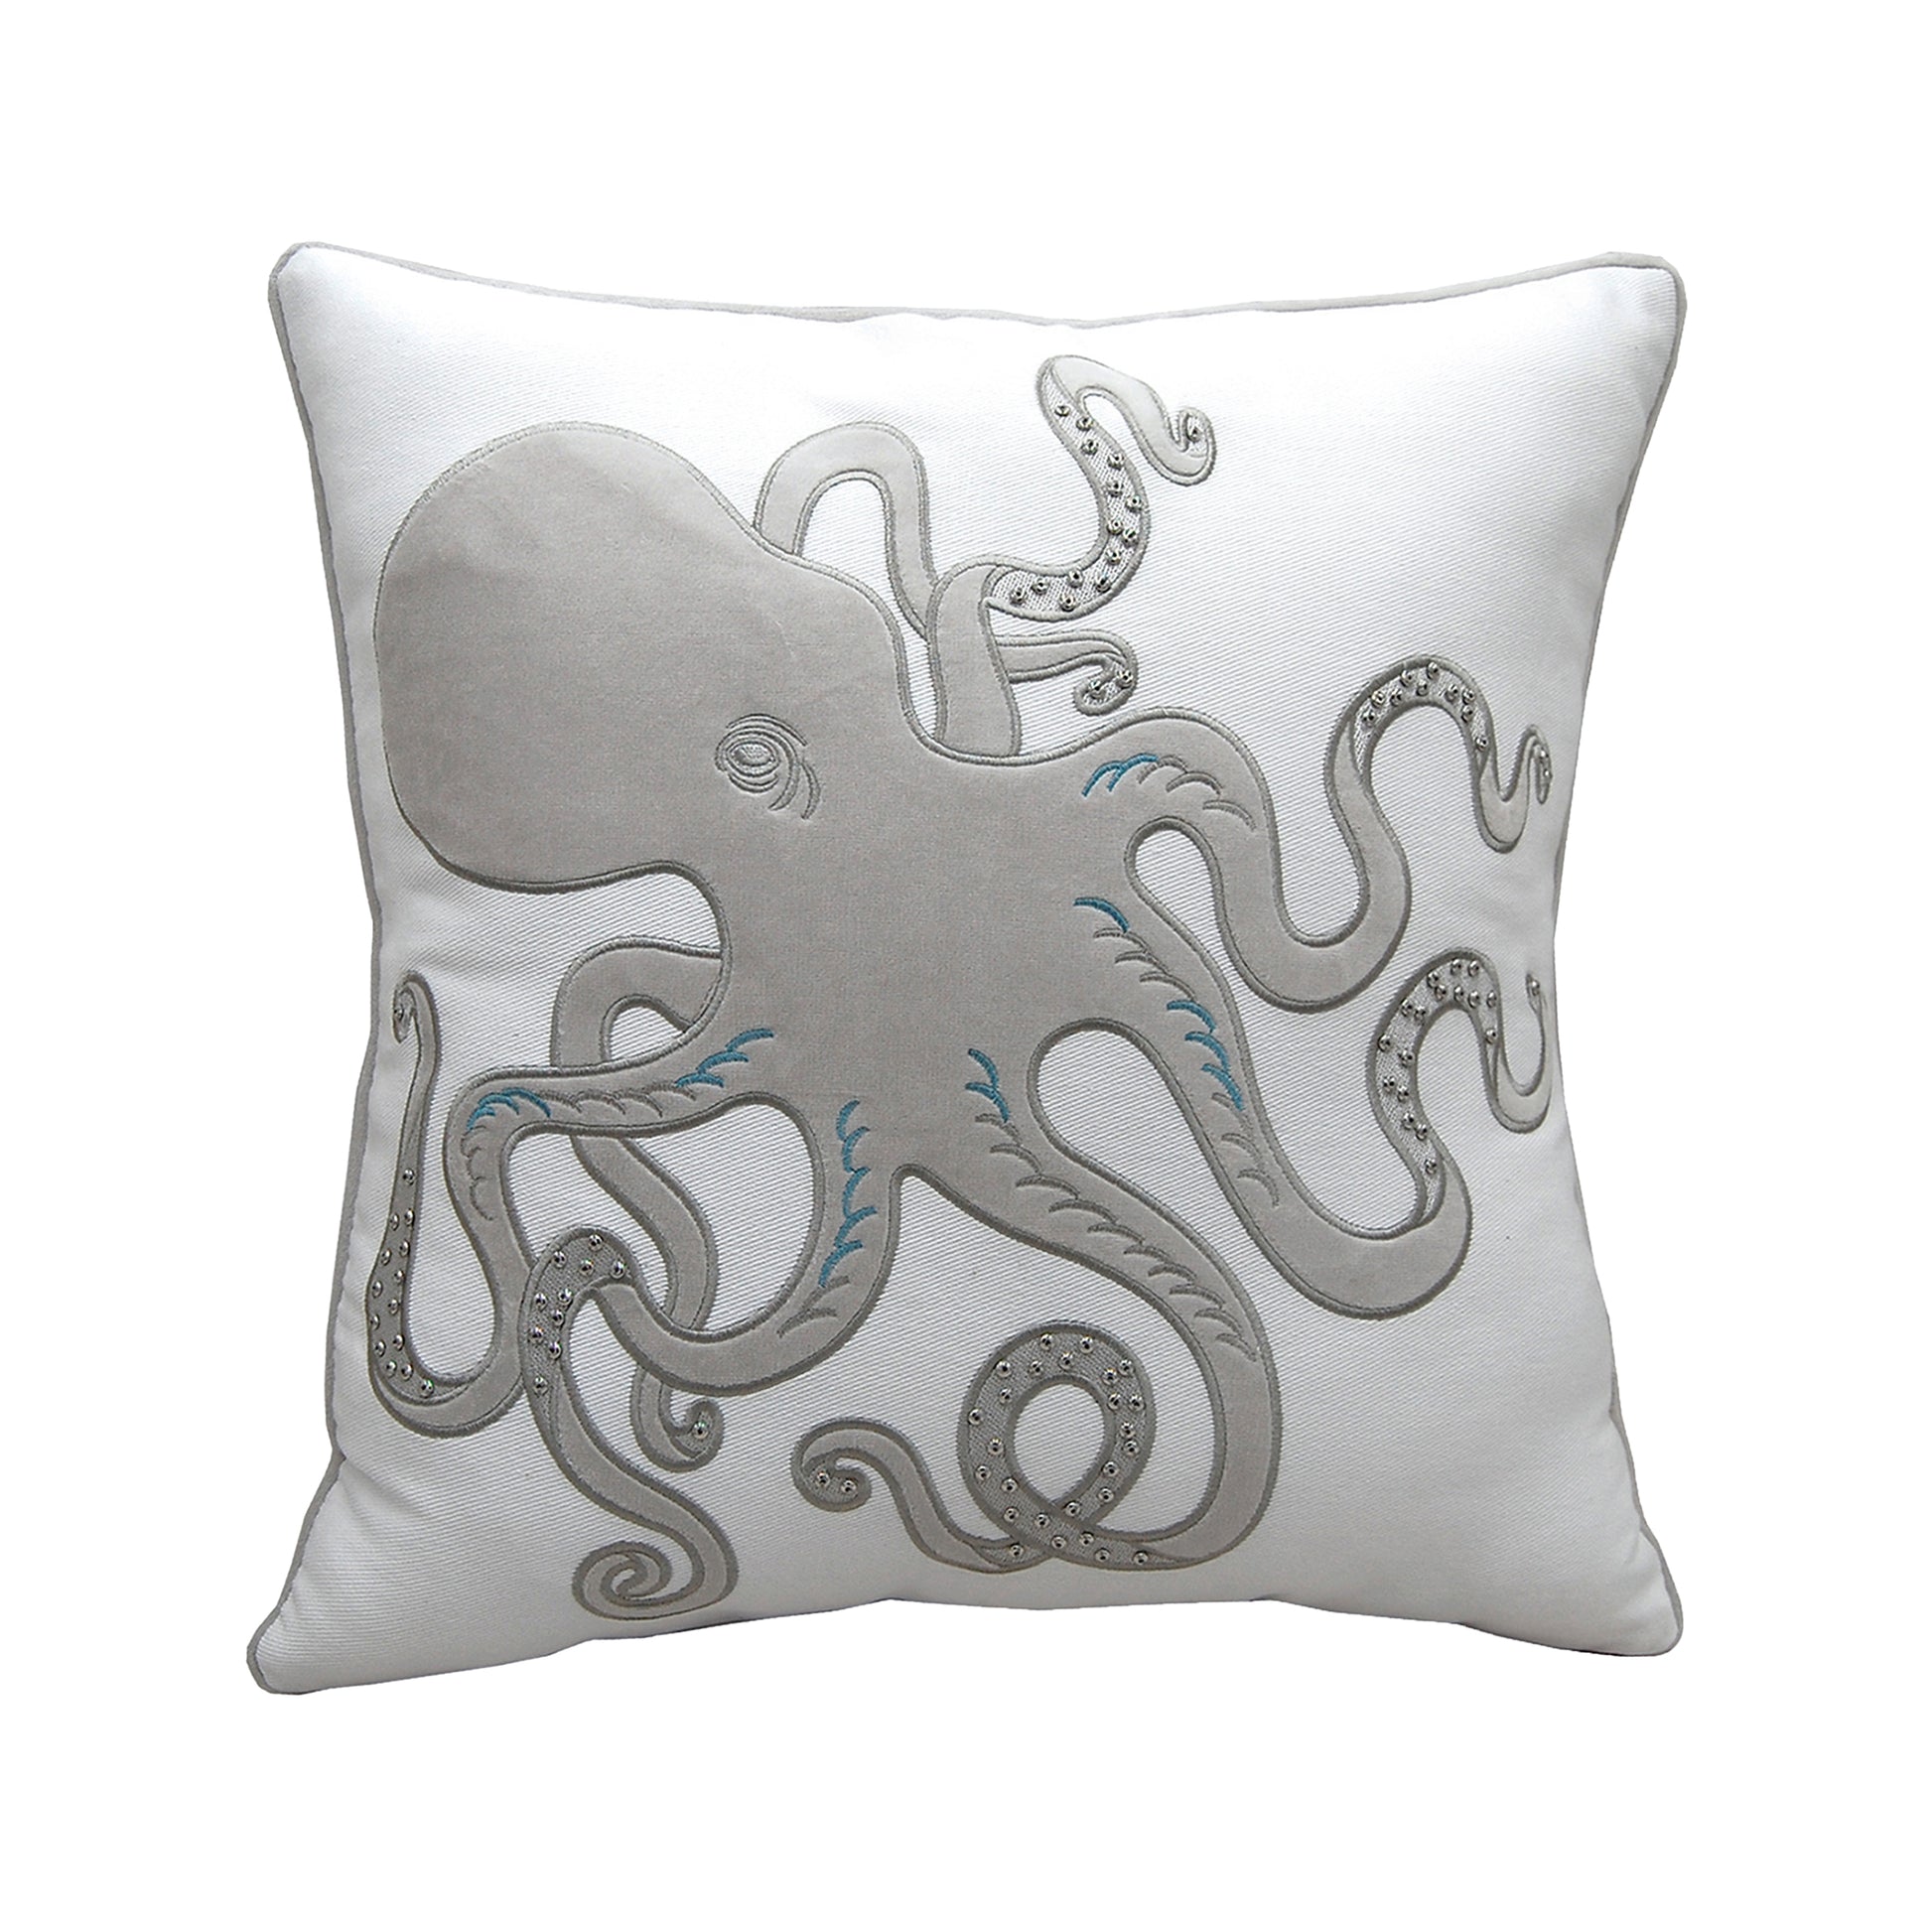 A large grey velvet octopus applique on a white background. Metal bead accents and gray piped edges.